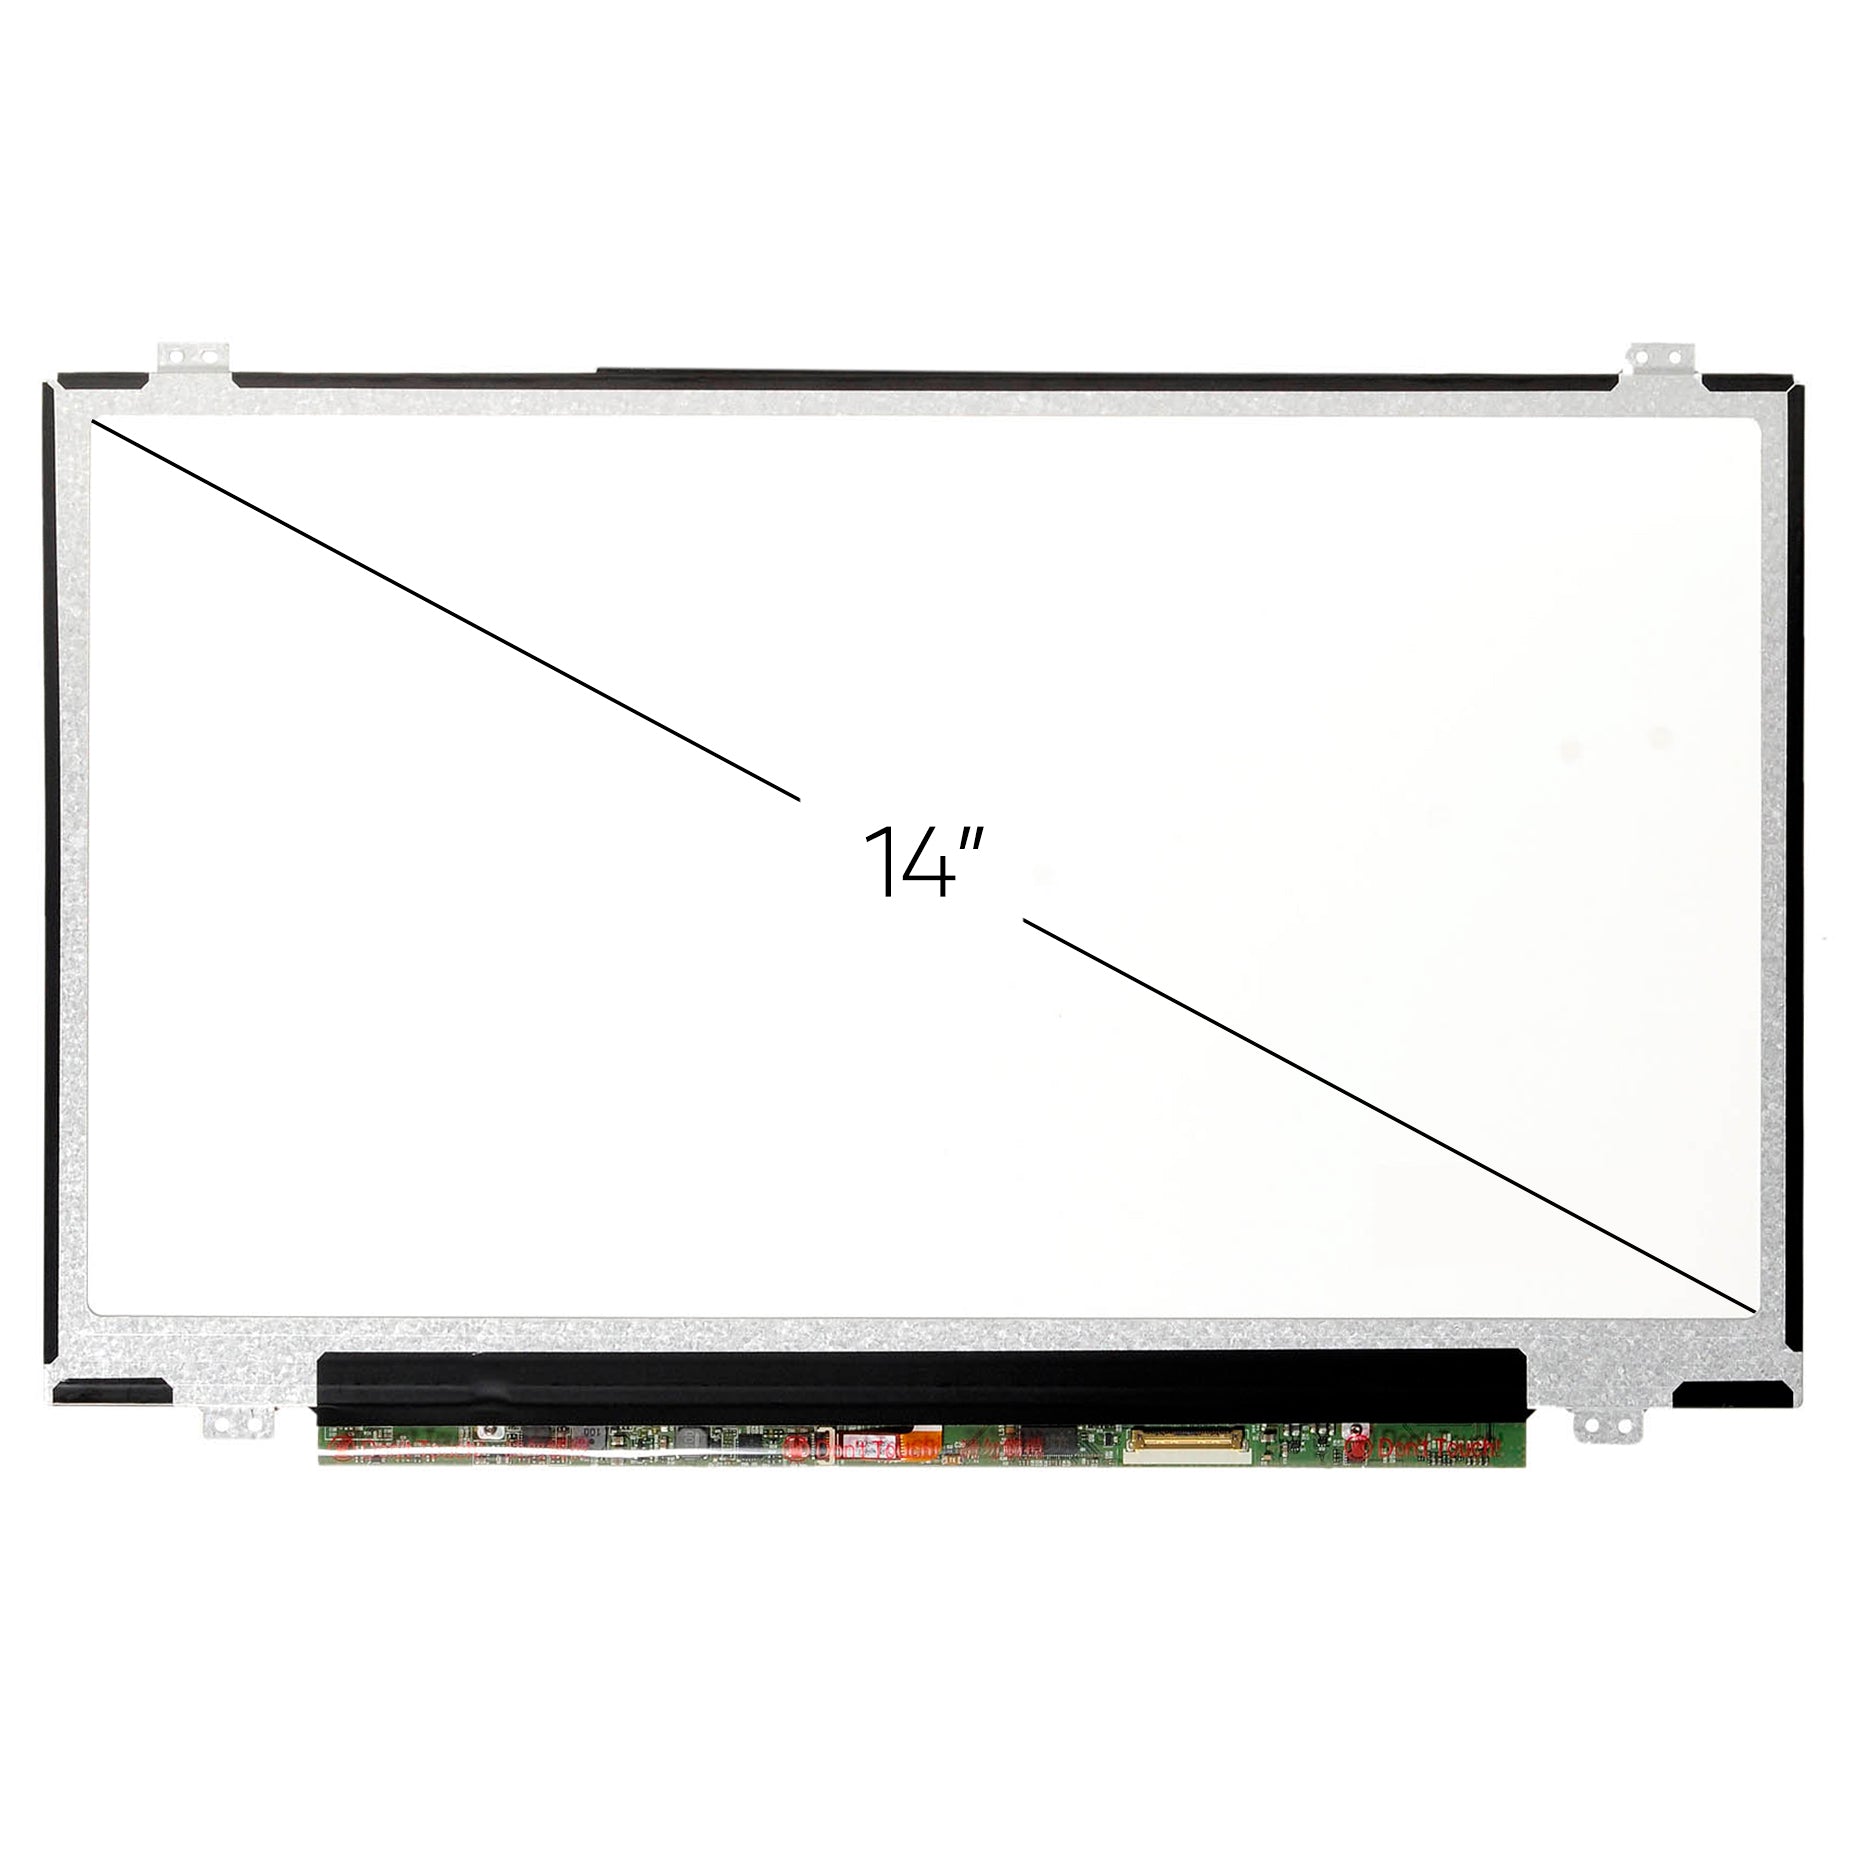 Screen Replacement for Lenovo Thinkpad E460 FHD 1920x1080 IPS Matte LCD LED Display